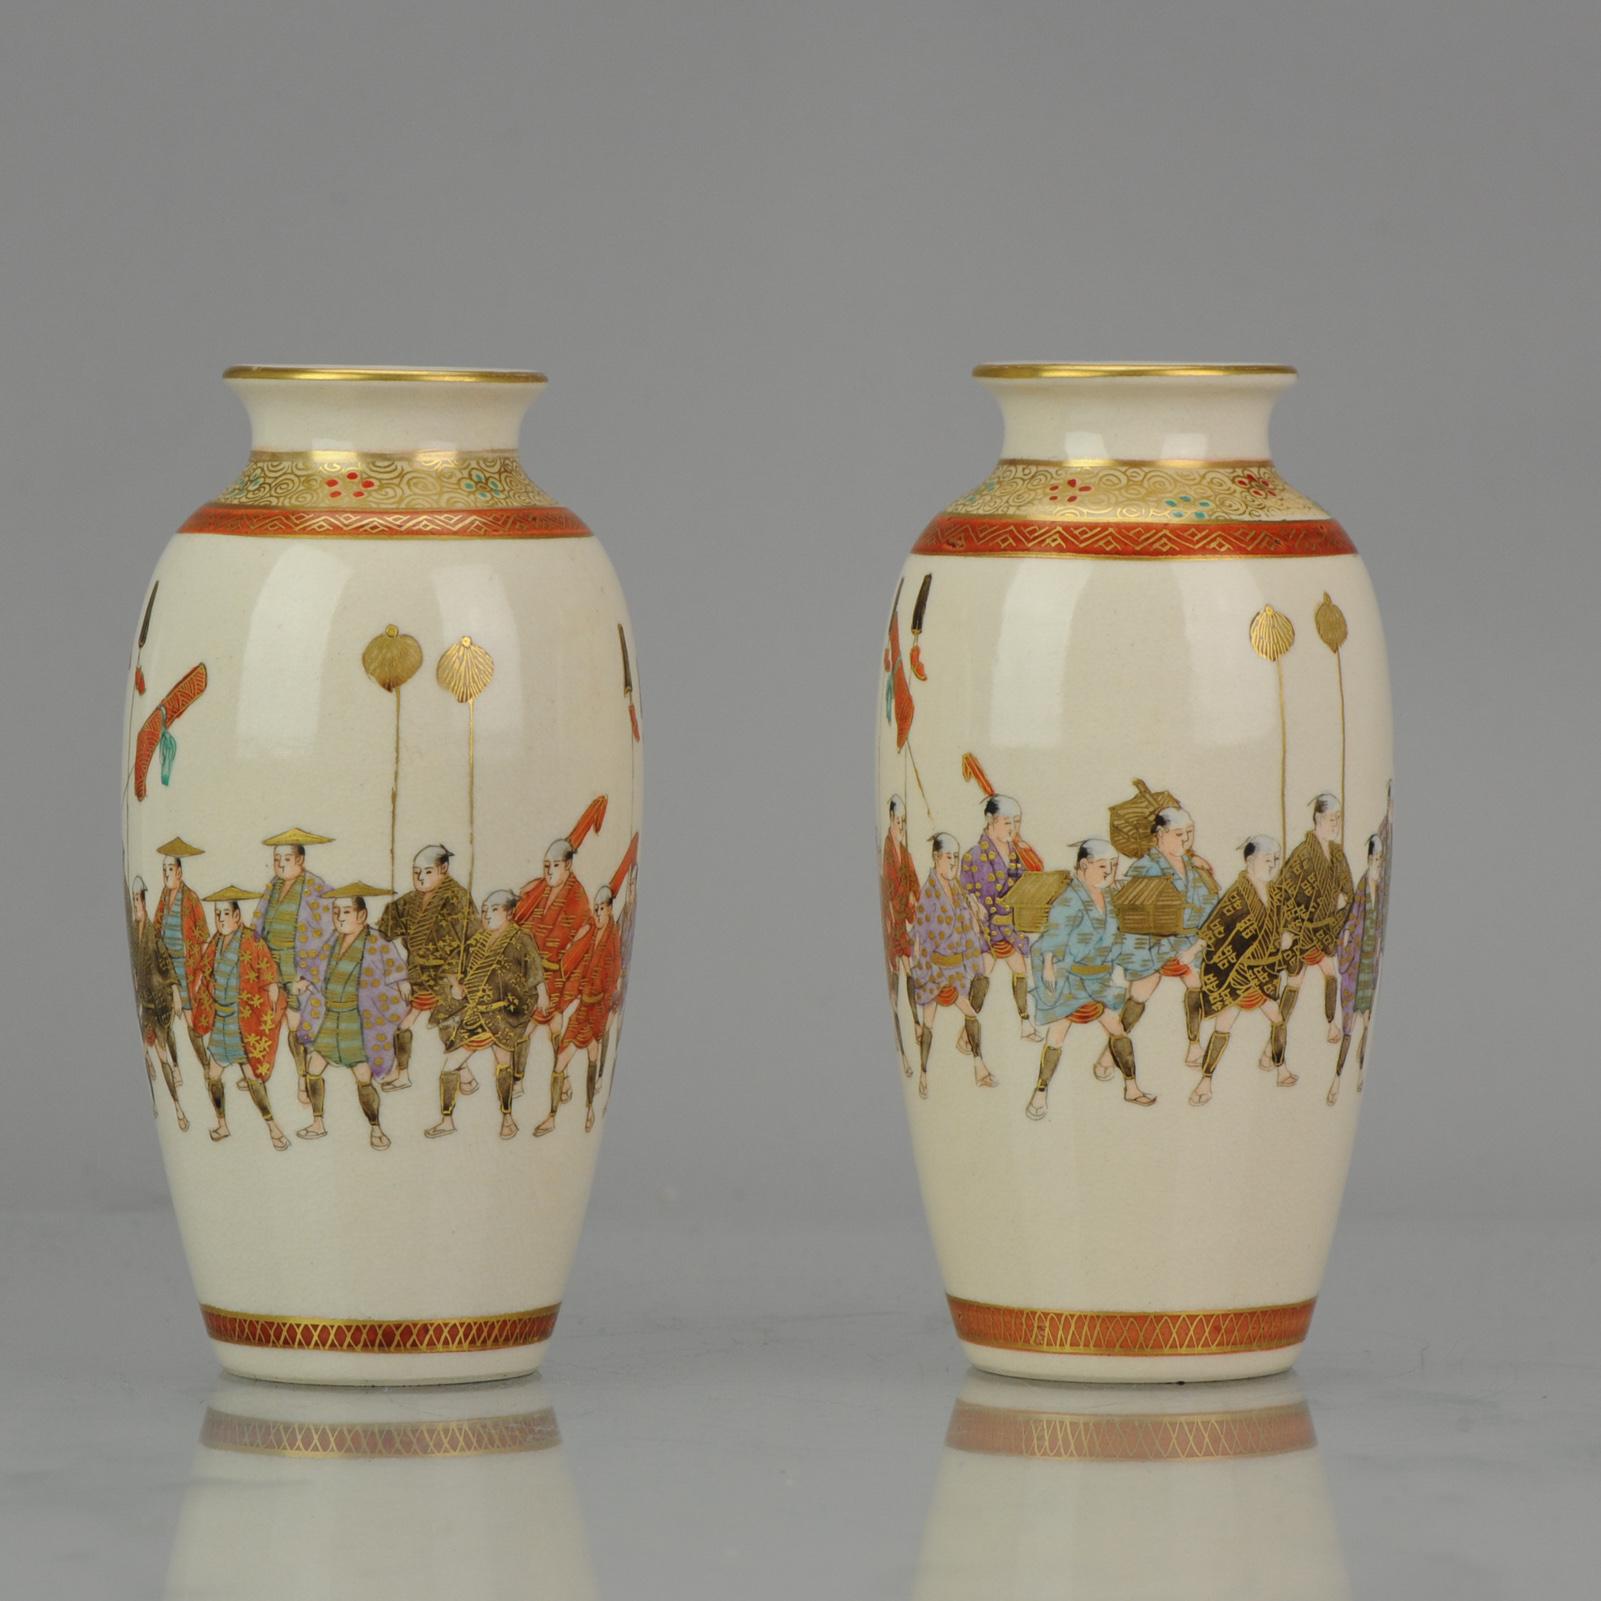 Pair Antique 19c Japanese Kyo Satsuma Seizan Vase Japan Procession Meiji Period In Excellent Condition For Sale In Amsterdam, Noord Holland